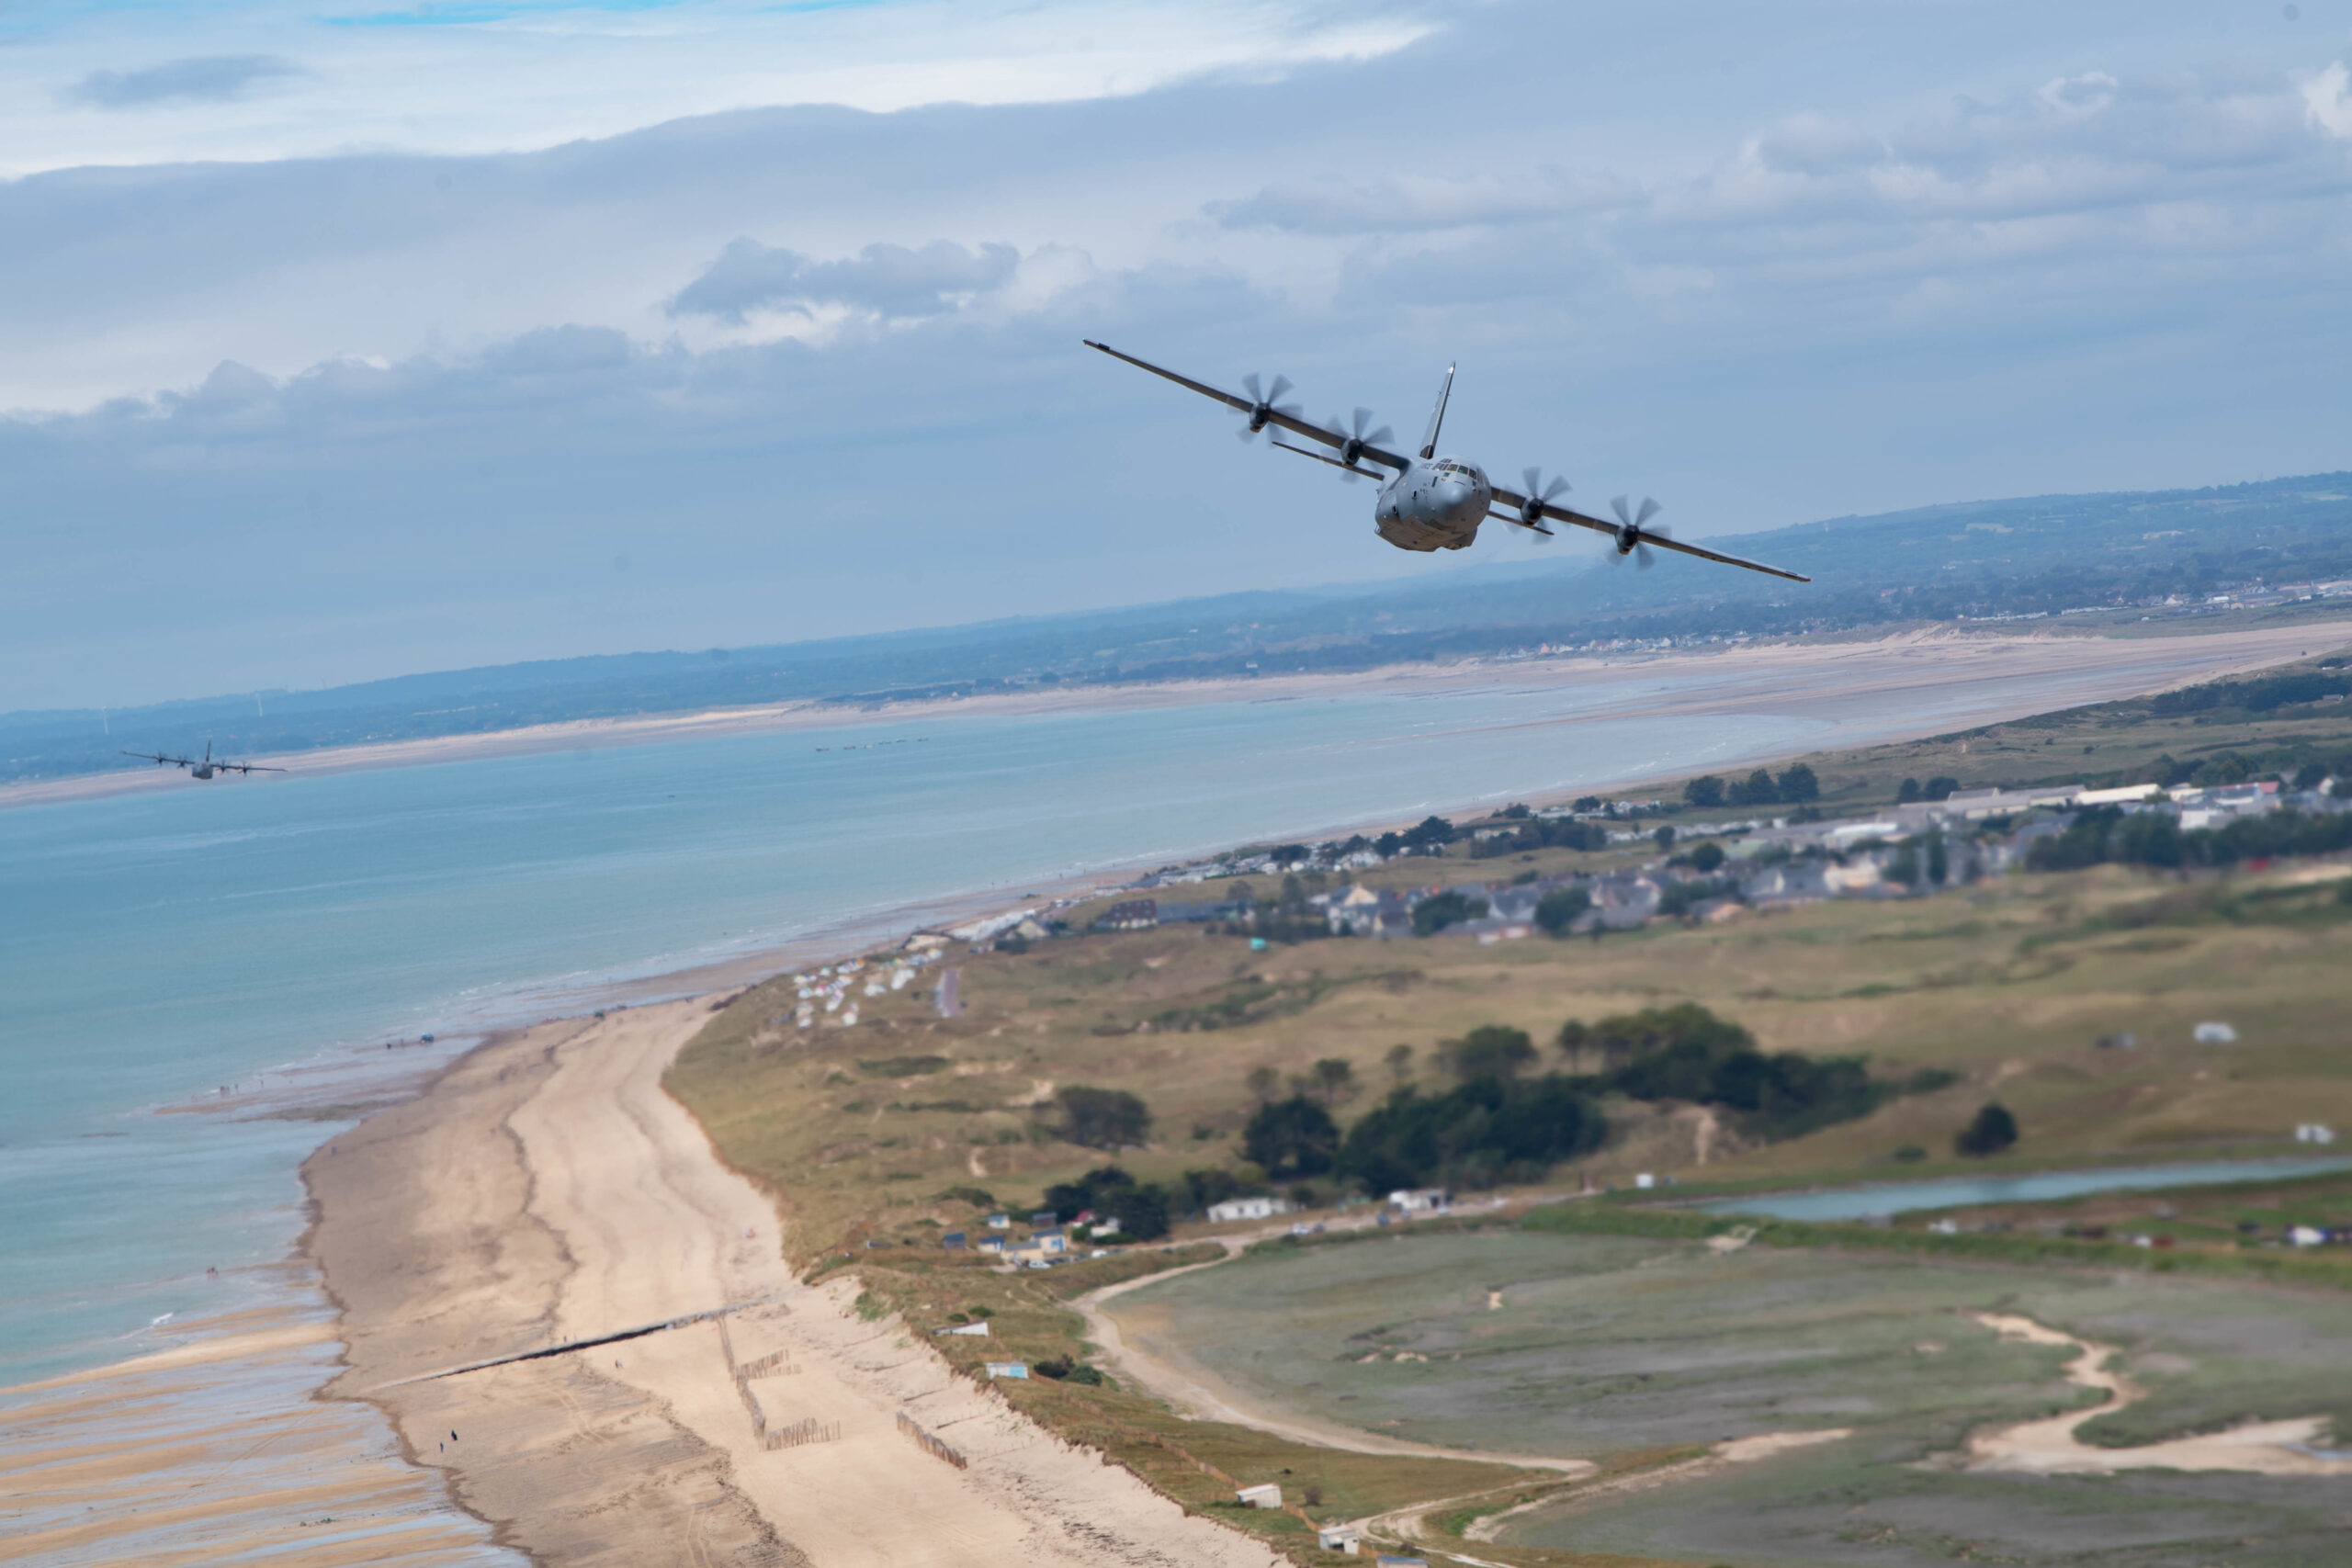 C-130J Super Hercules aircraft assigned to Ramstein Air Base, Germany, fly over the beaches of Normandy June 6, 2021. More than 150,000 soldiers from the Allied Forces stormed Normandy Beach and successfully changed the course of World War ll, June 6, 1944.